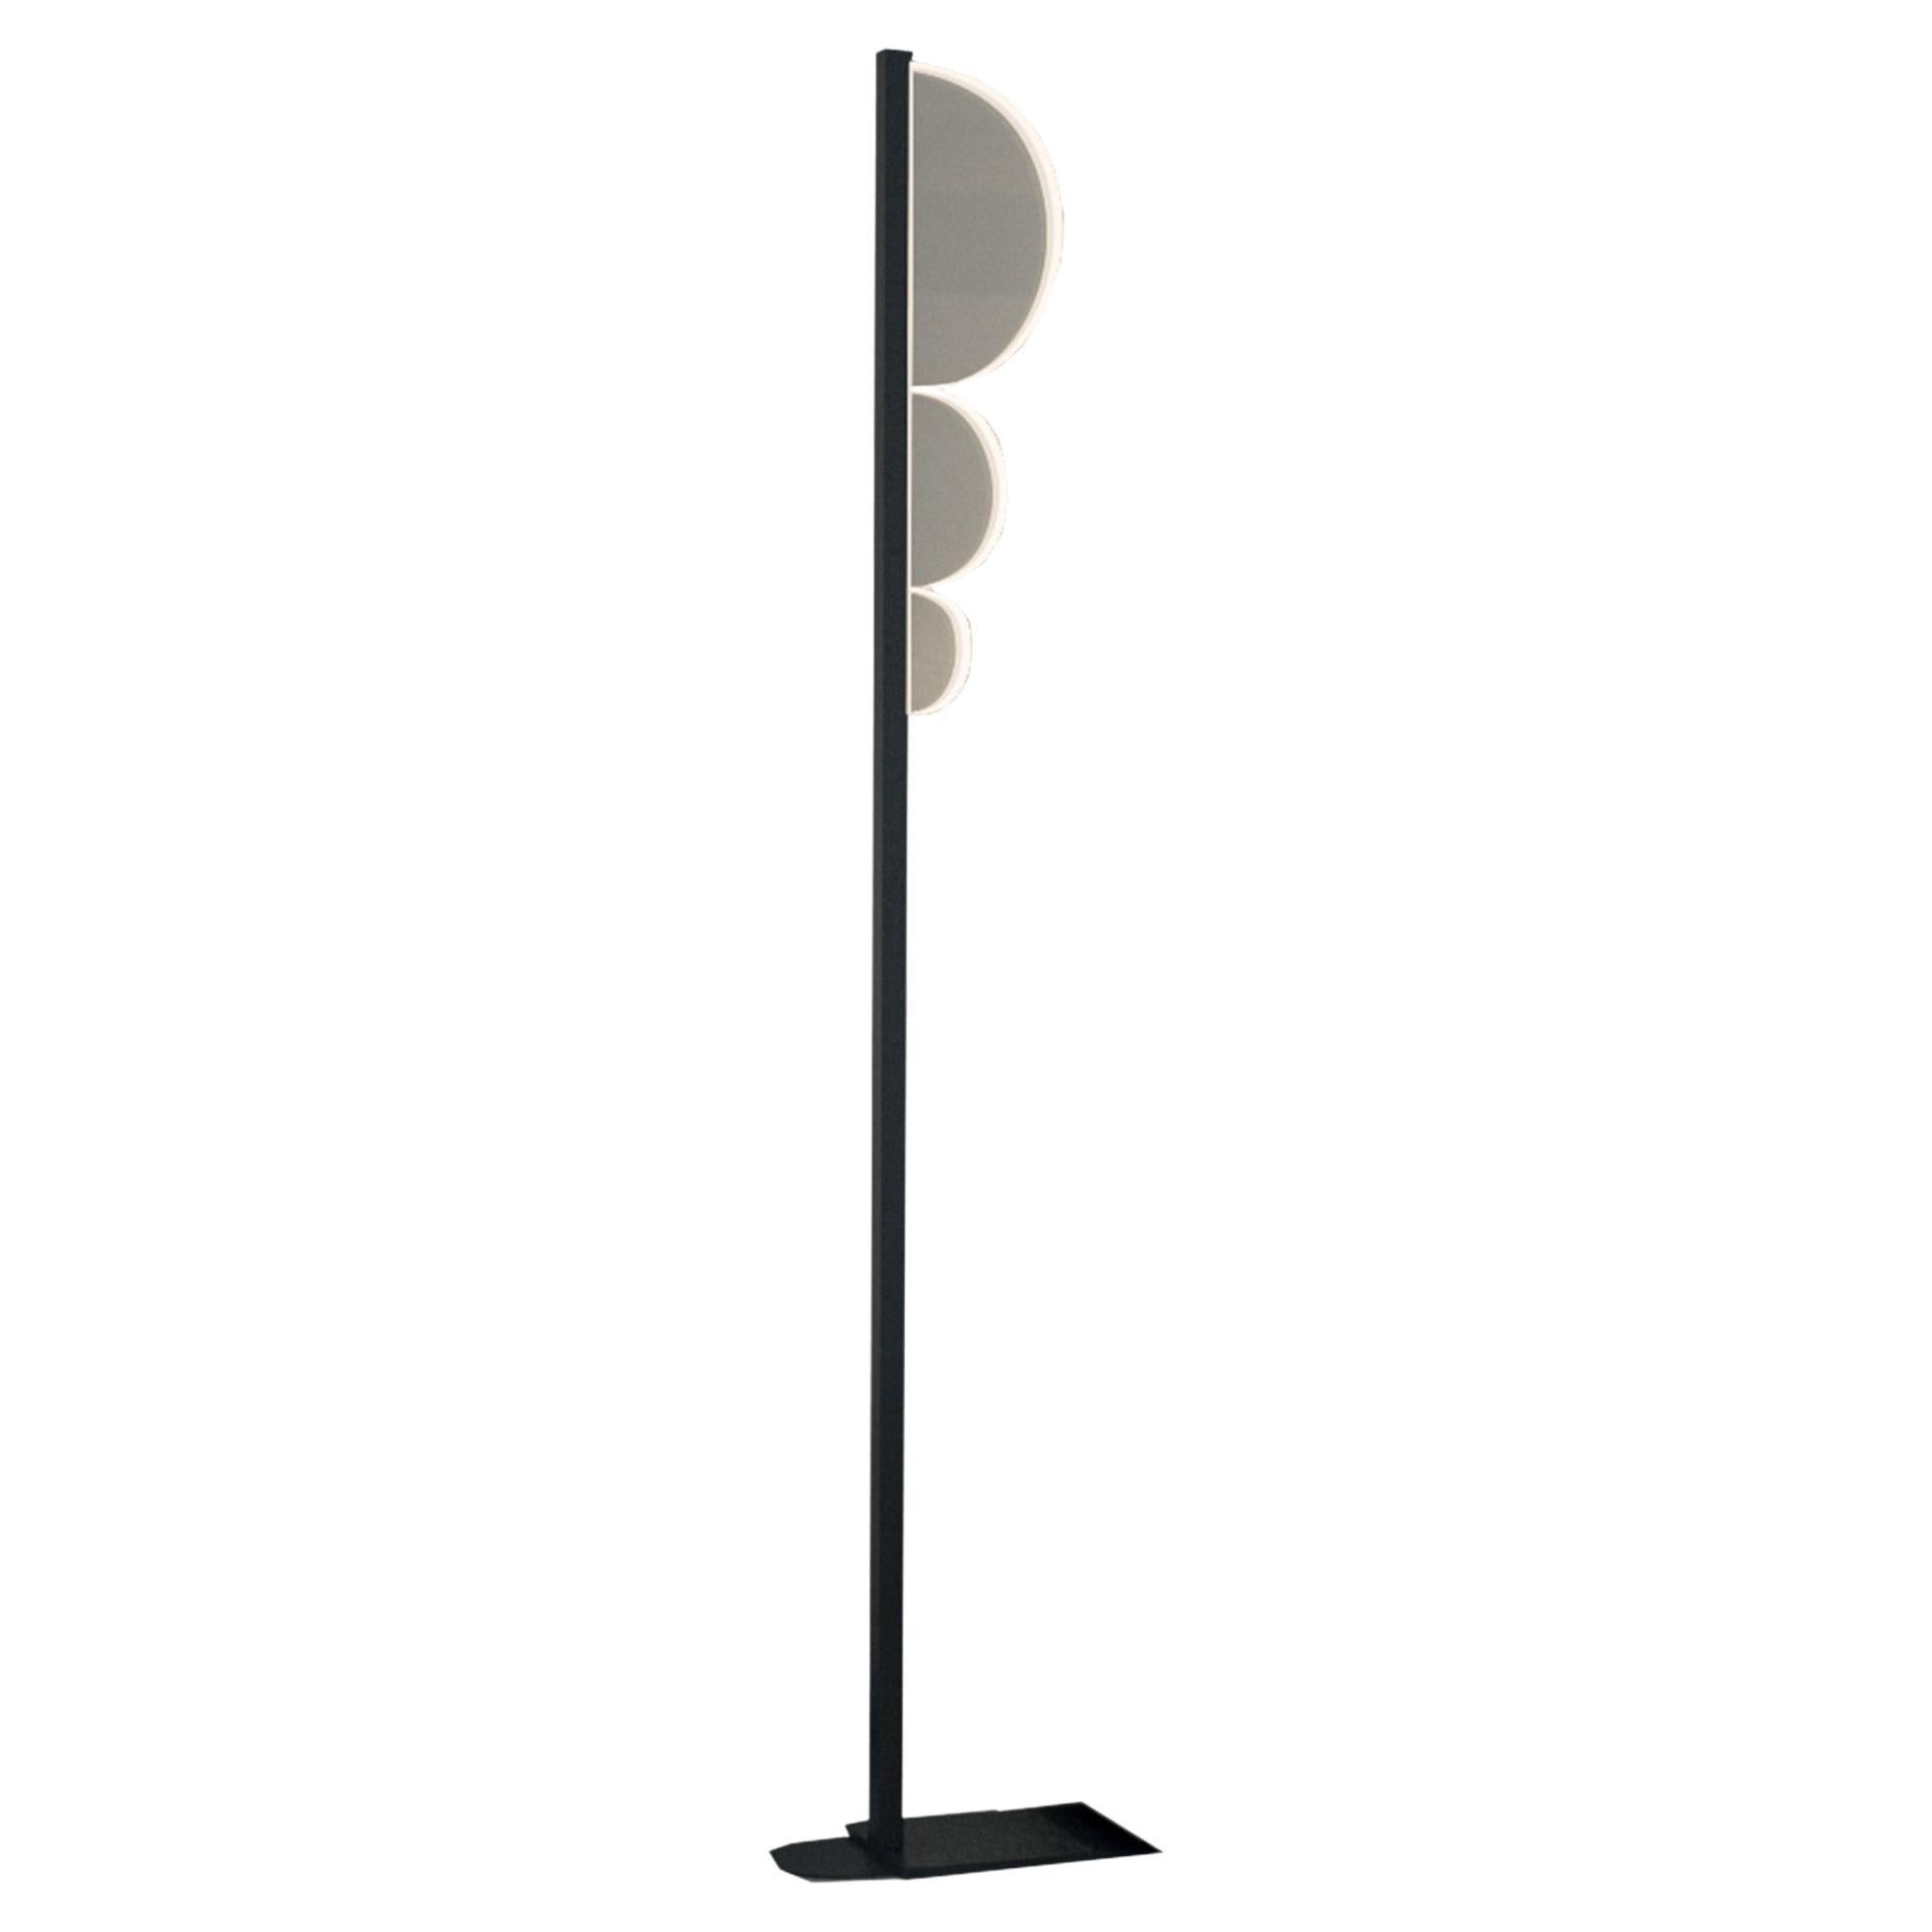 Totem Floor Lamp by Yonathan Moore, Represented by Tuleste Factory